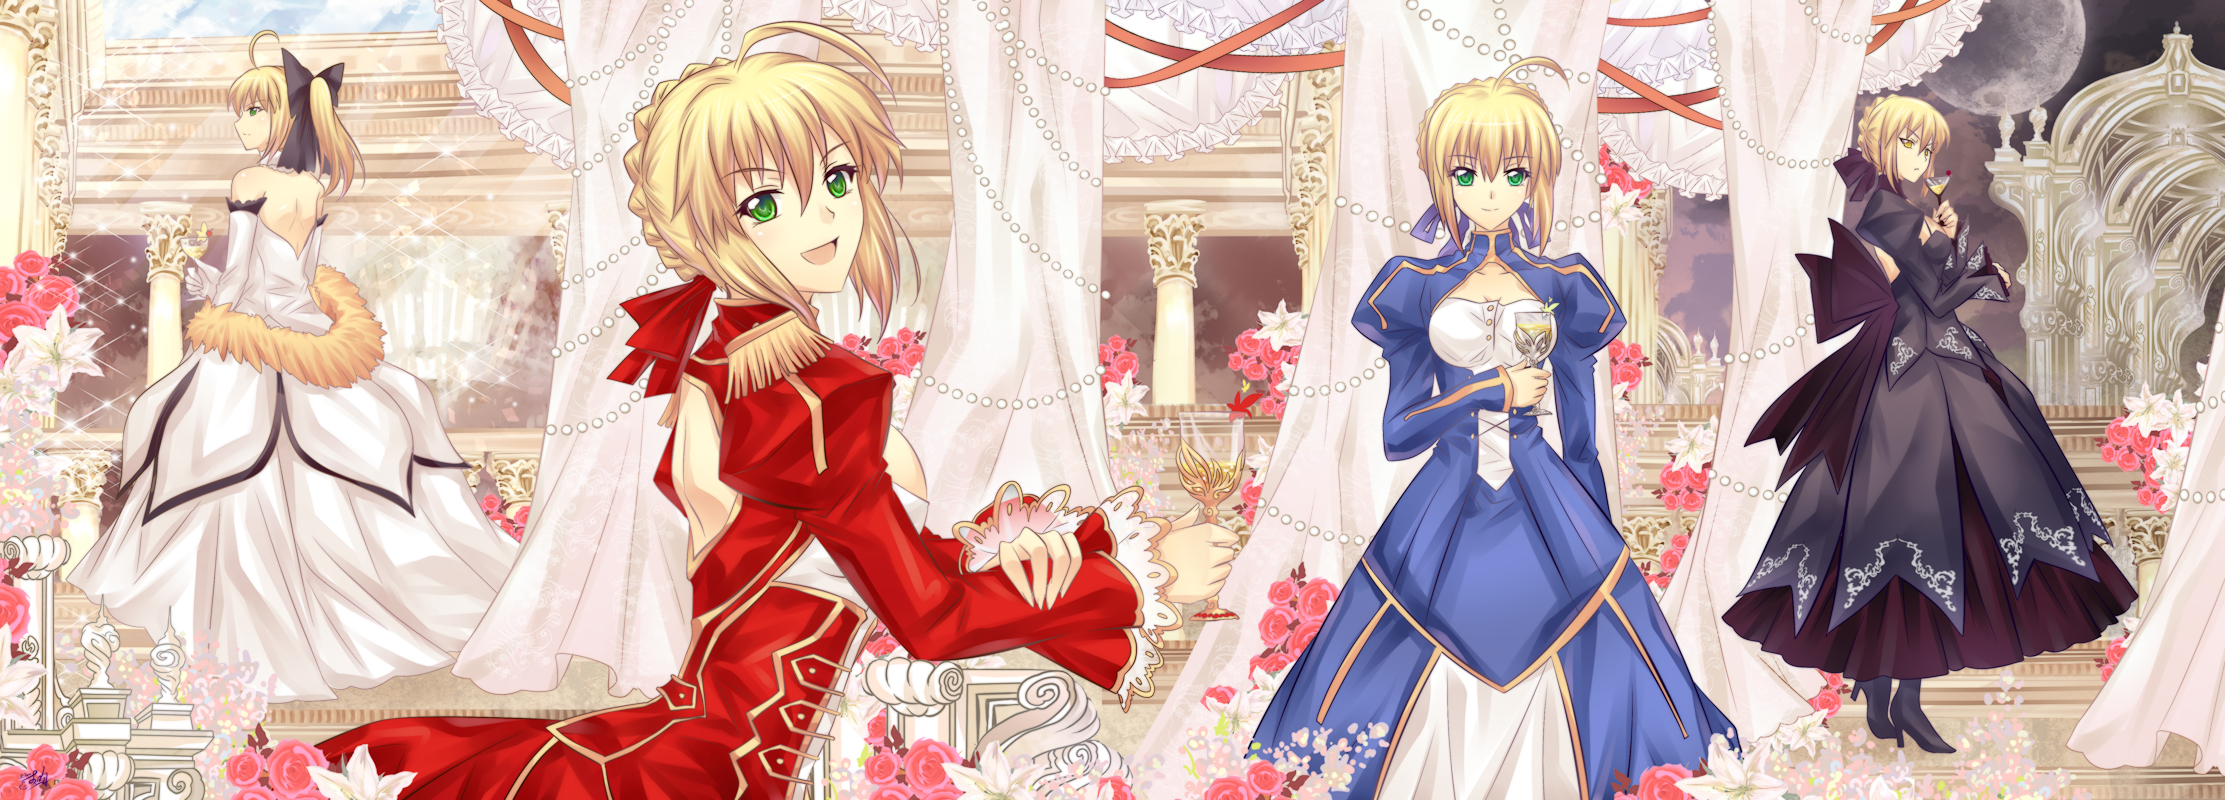 Anime 2225x800 anime anime girls Fate series Fate/Stay Night fate/stay night: heaven's feel Fate/Unlimited Codes  Fate/Extra Fate/Extra CCC Fate/Grand Order blonde Artoria Pendragon Saber Saber Alter Saber Lily Nero Claudius